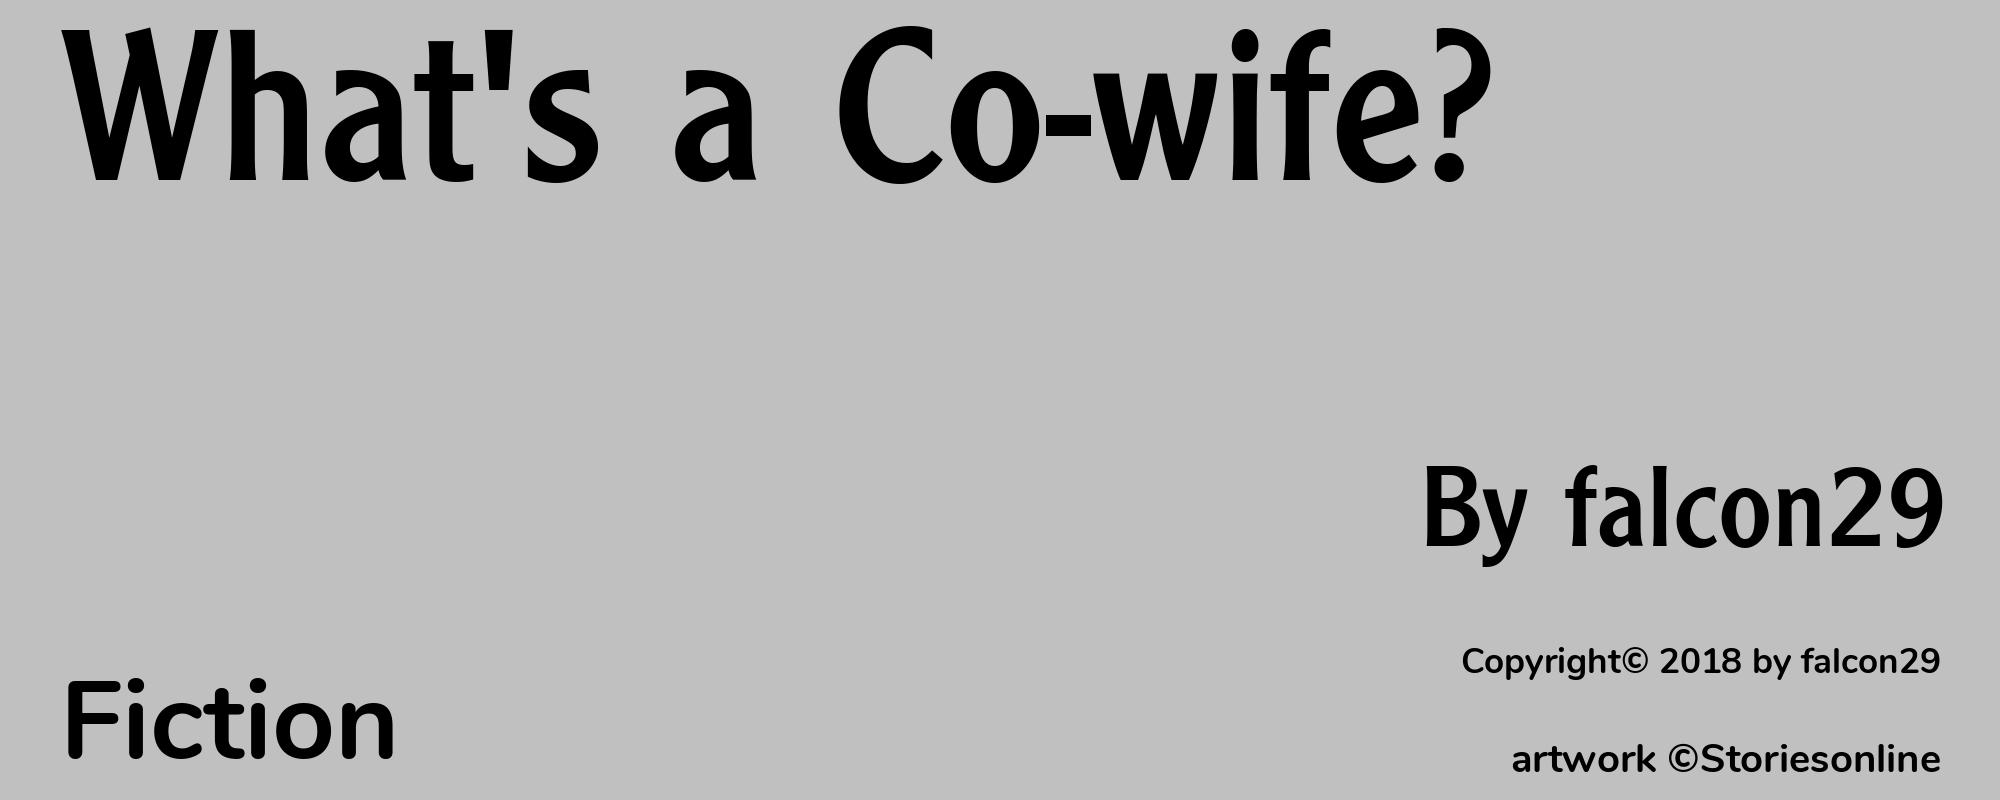 What's a Co-wife? - Cover